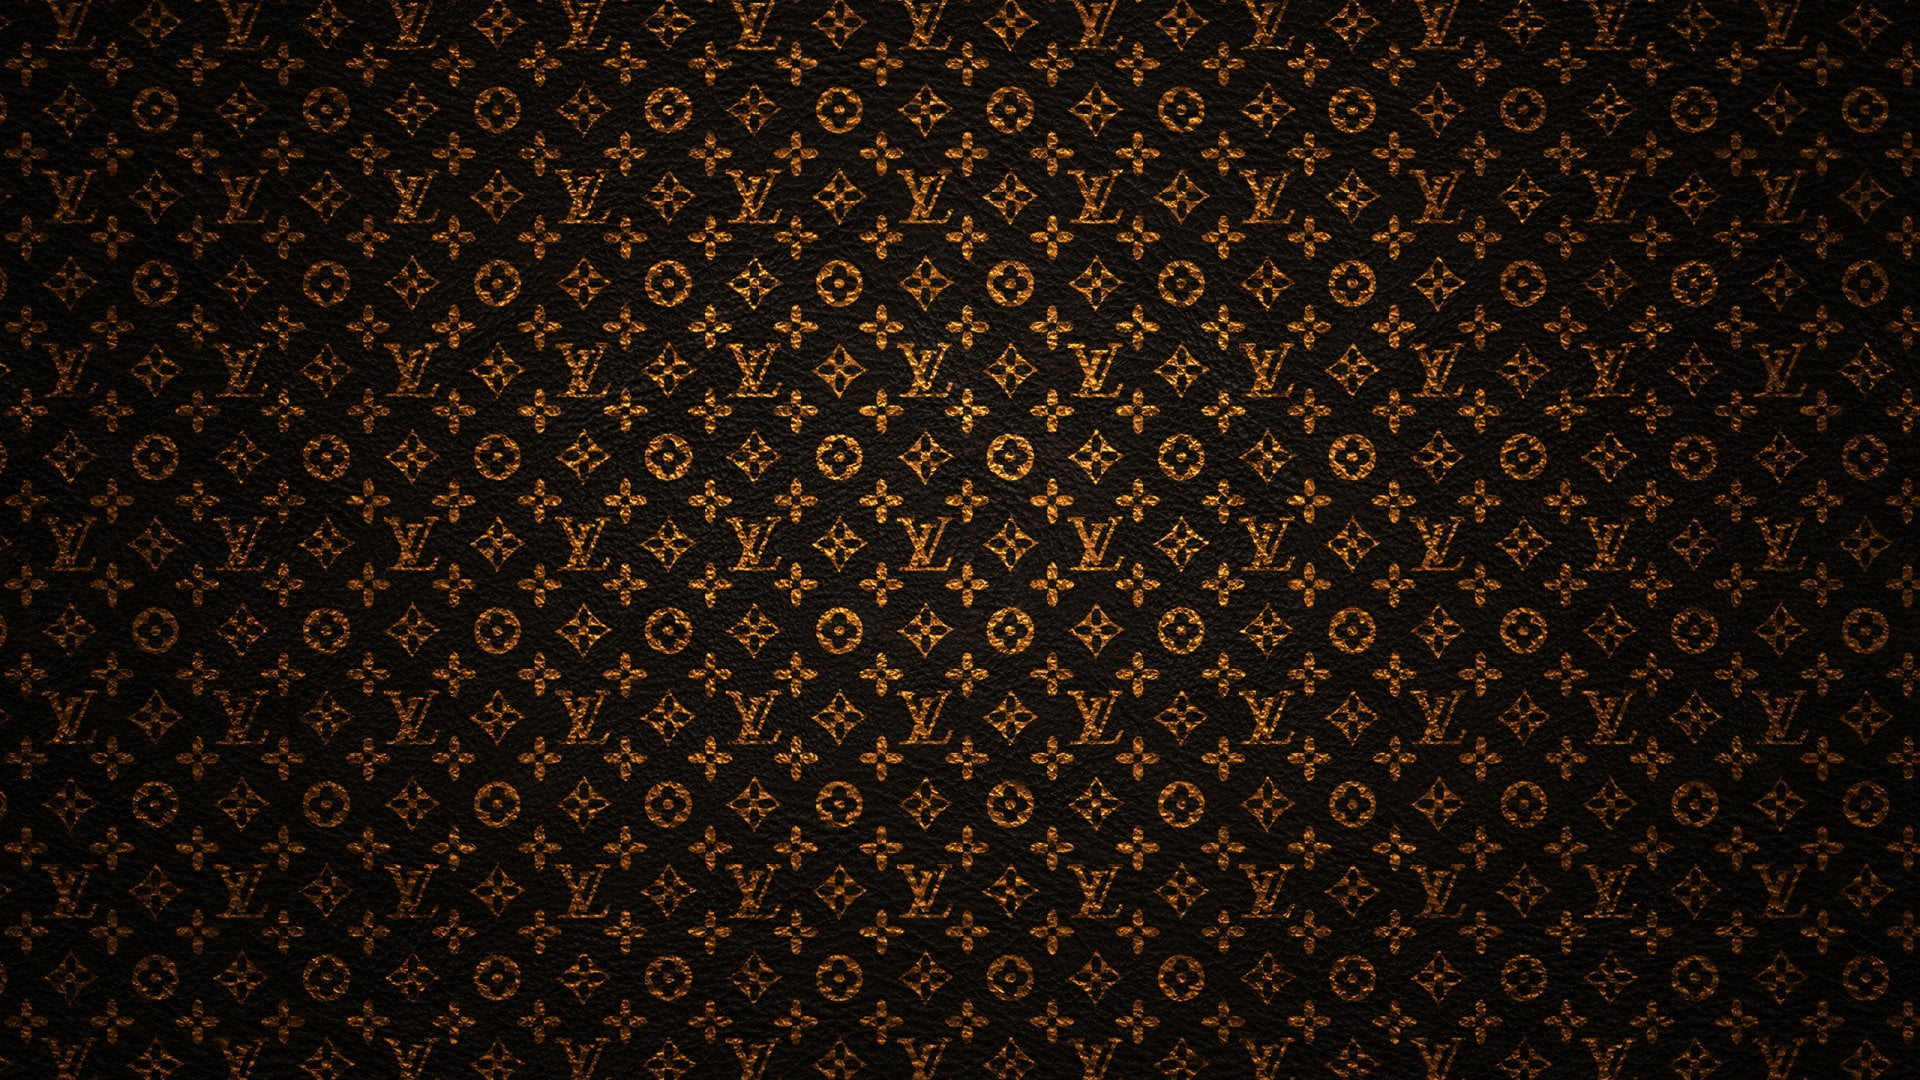 Products, Louis Vuitton, backgrounds, pattern, dark, full frame